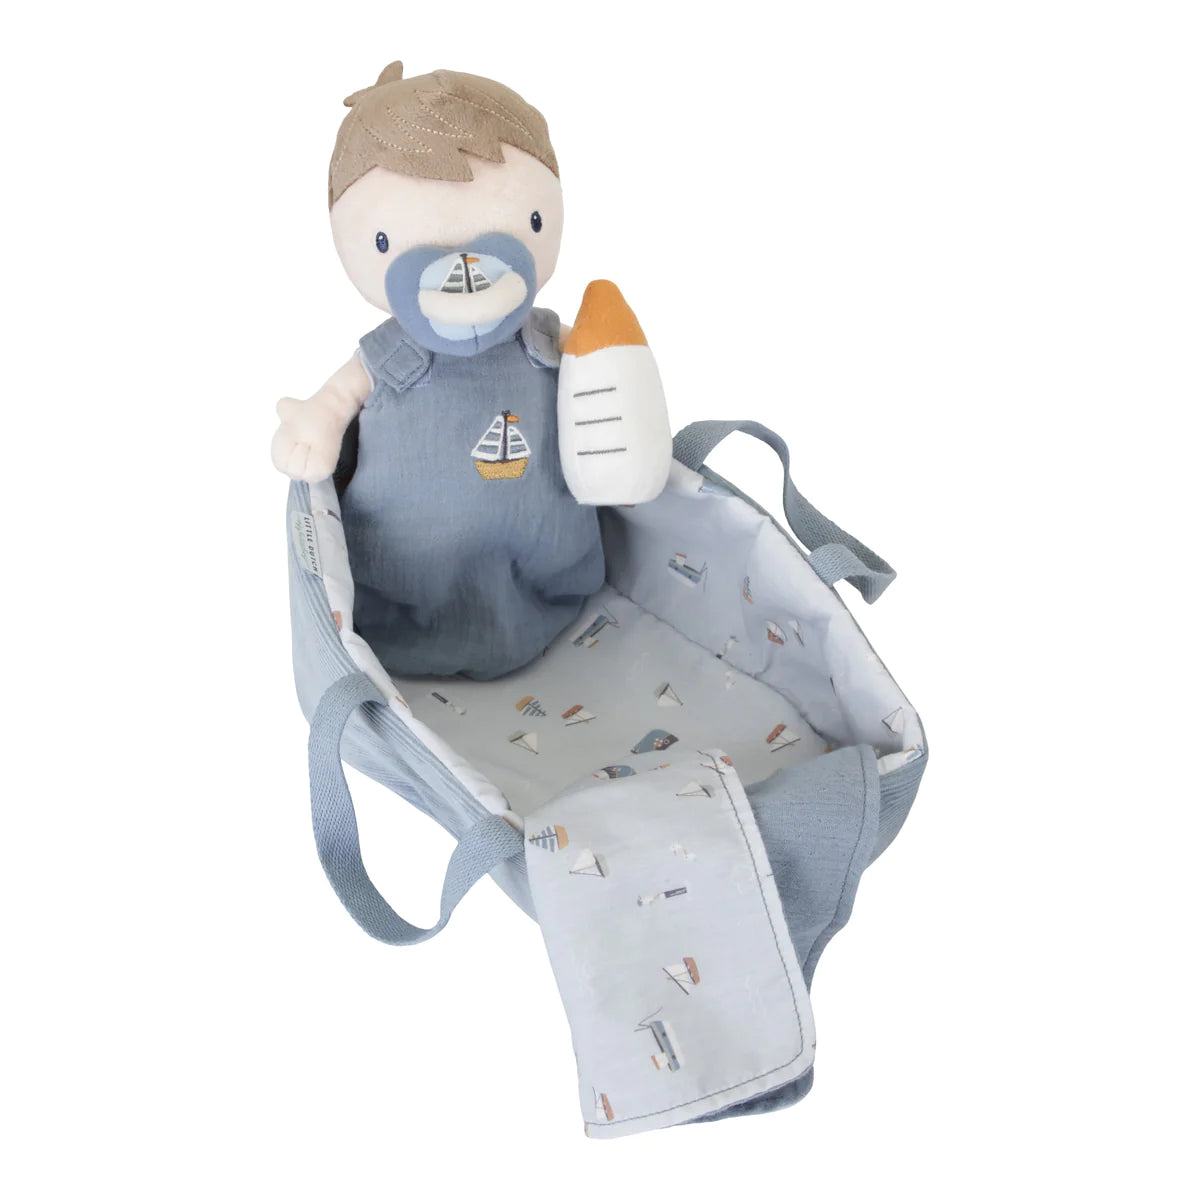 Little Dutch Baby Jim Doll with his dummy and bottle in his sleeping bag